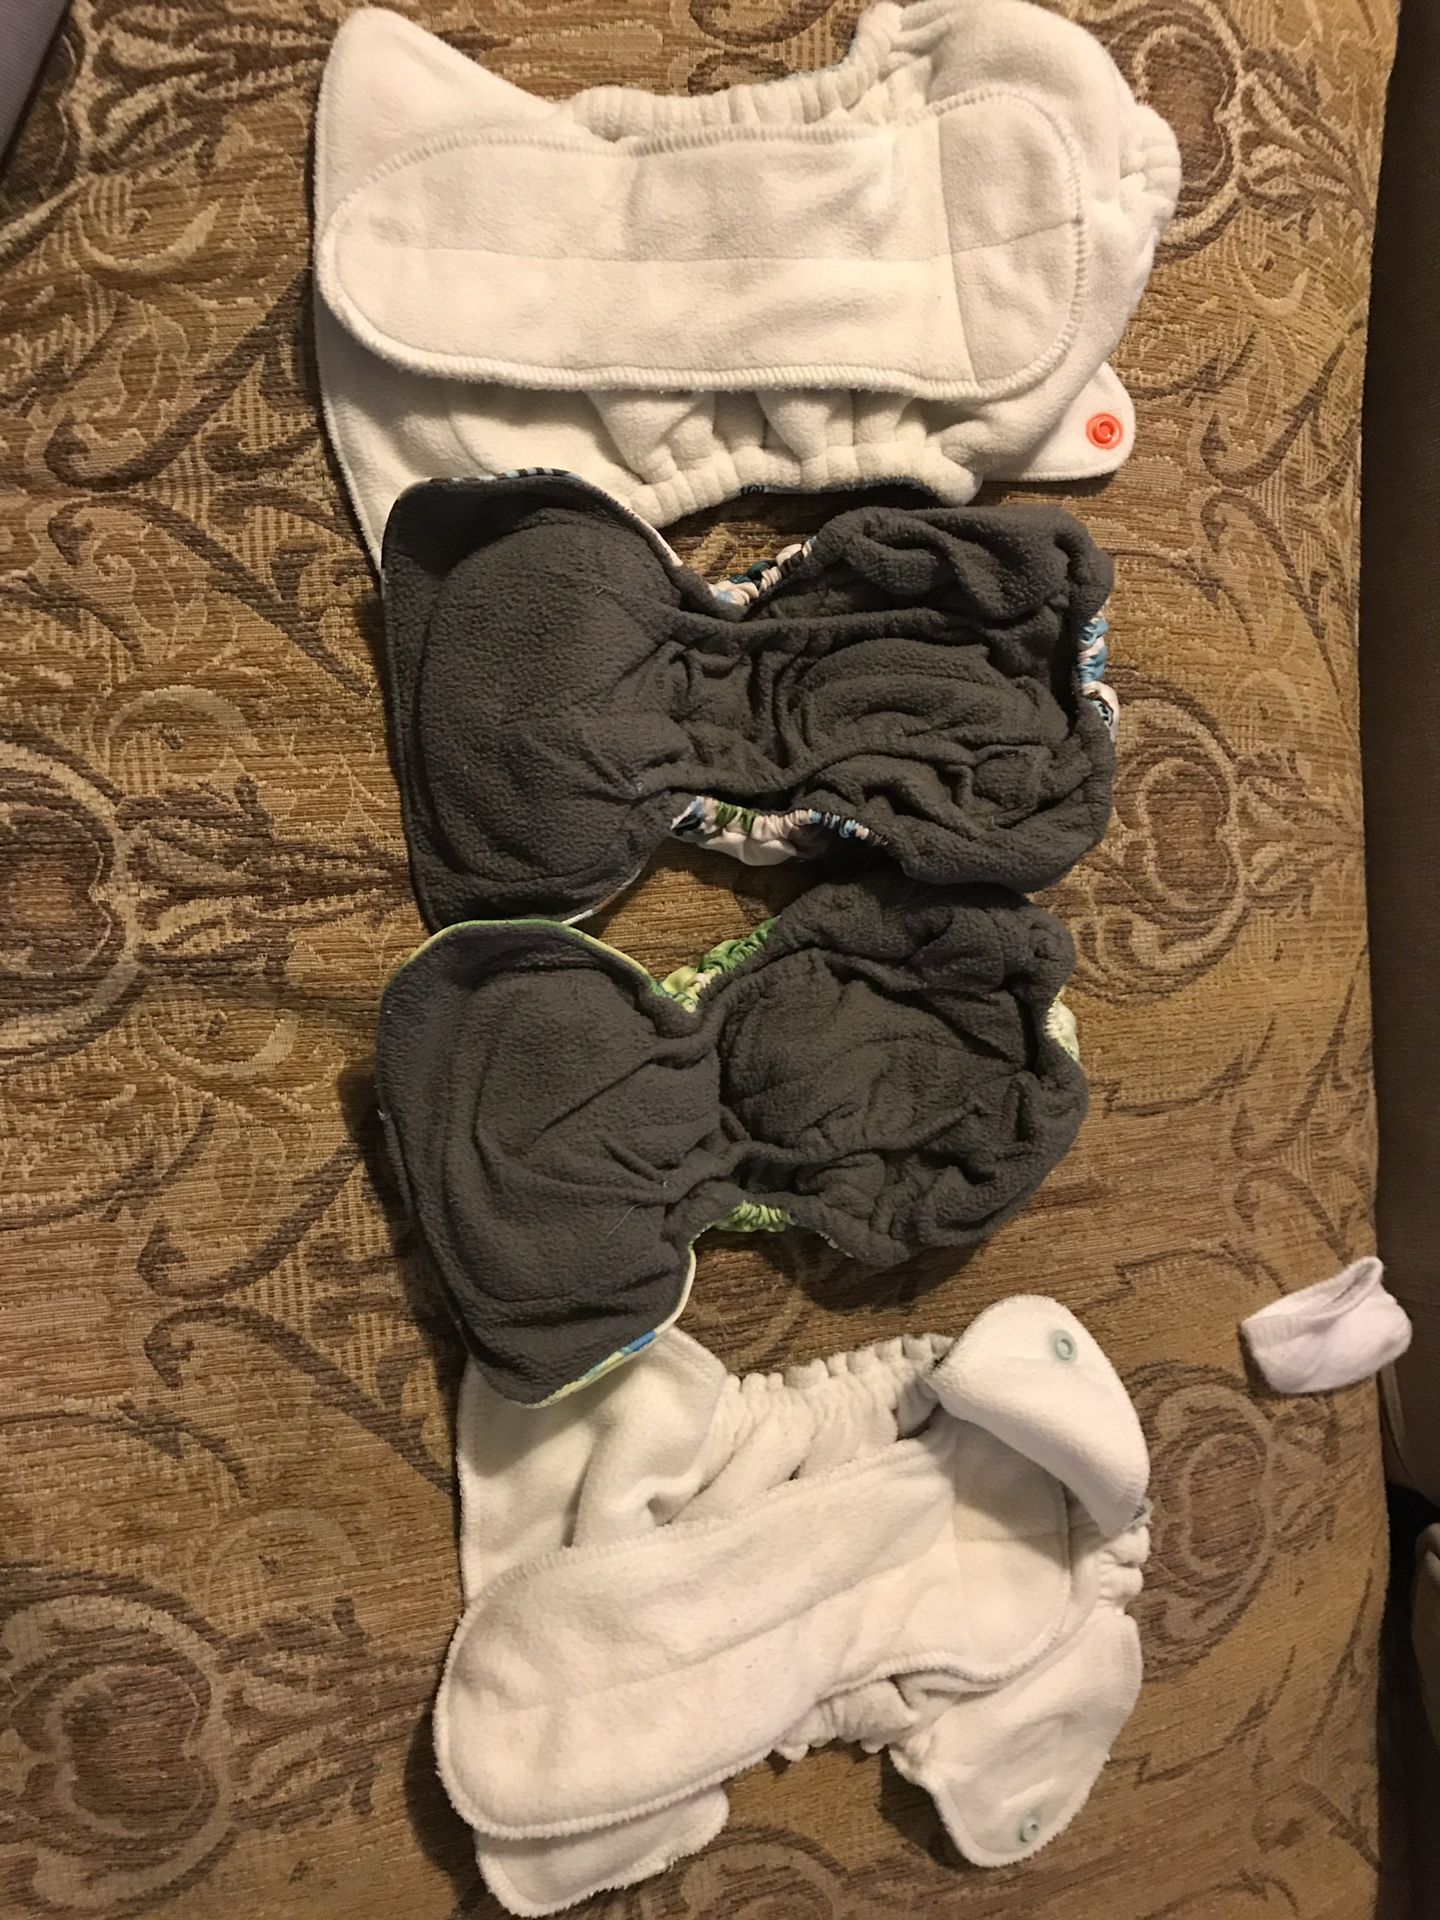 Still Available!!! Newborn Cloth Diapers! OBO